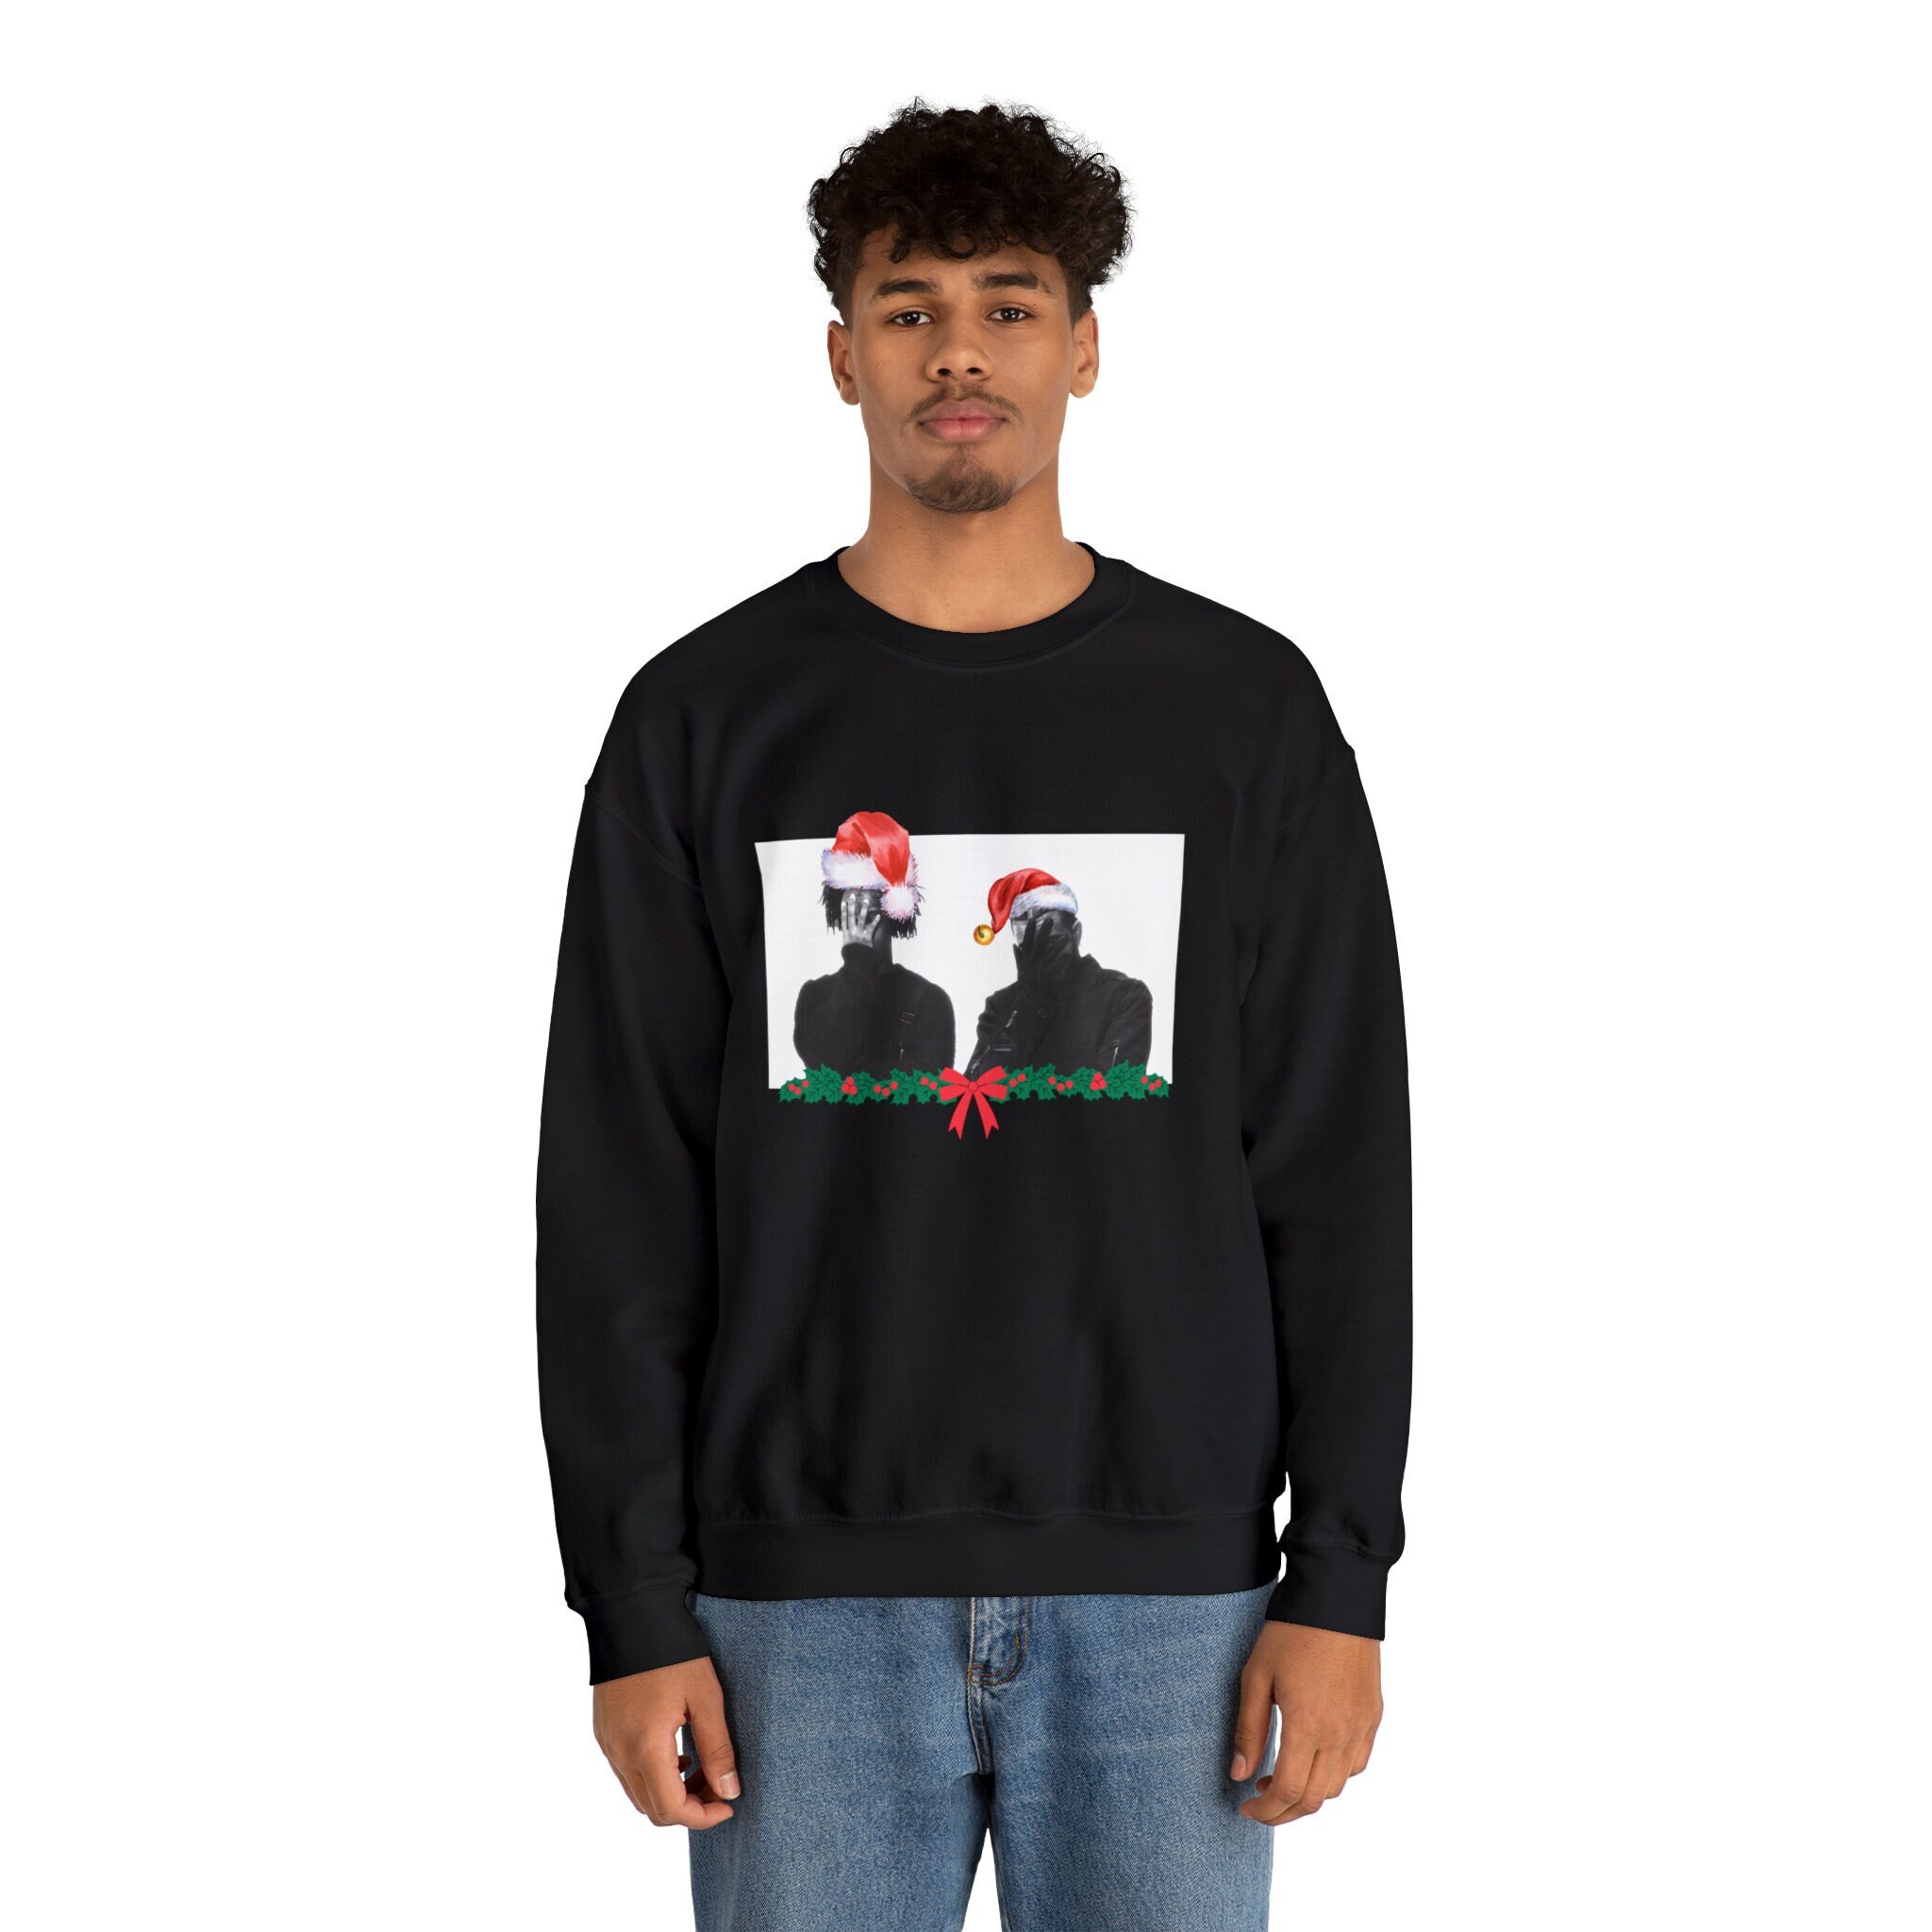 21 Savage Clothing: Curated Shirts, Jeans, Shoes & More